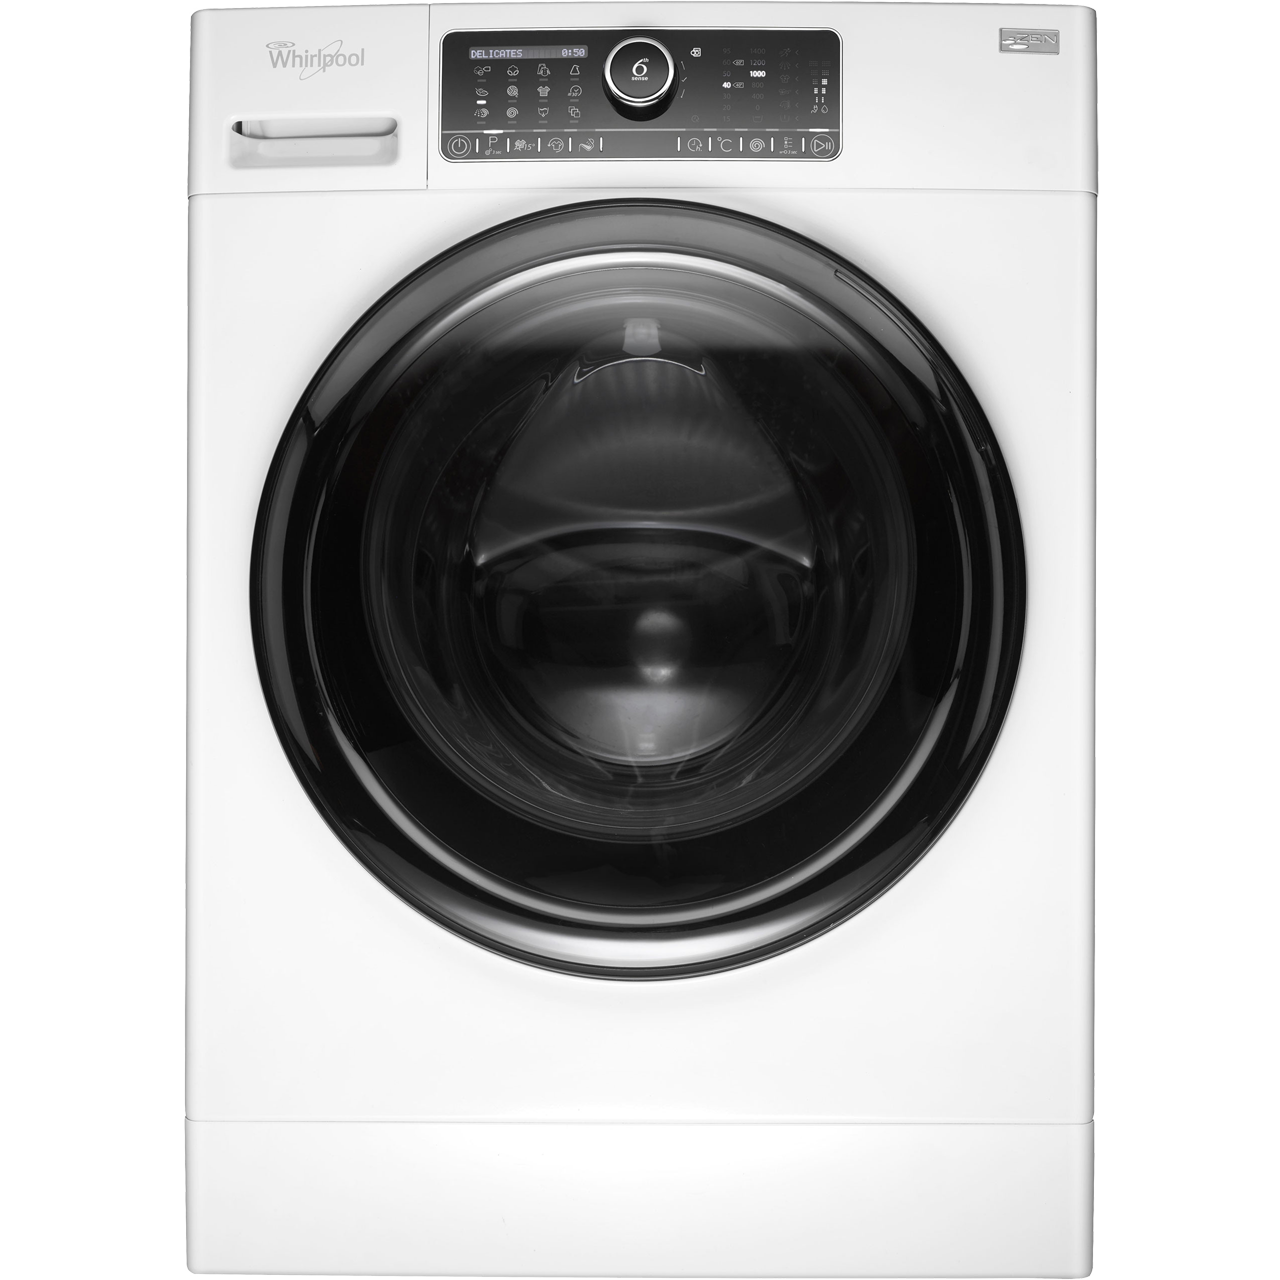 Whirlpool FSCR10432 10Kg Washing Machine with 1400 rpm Review